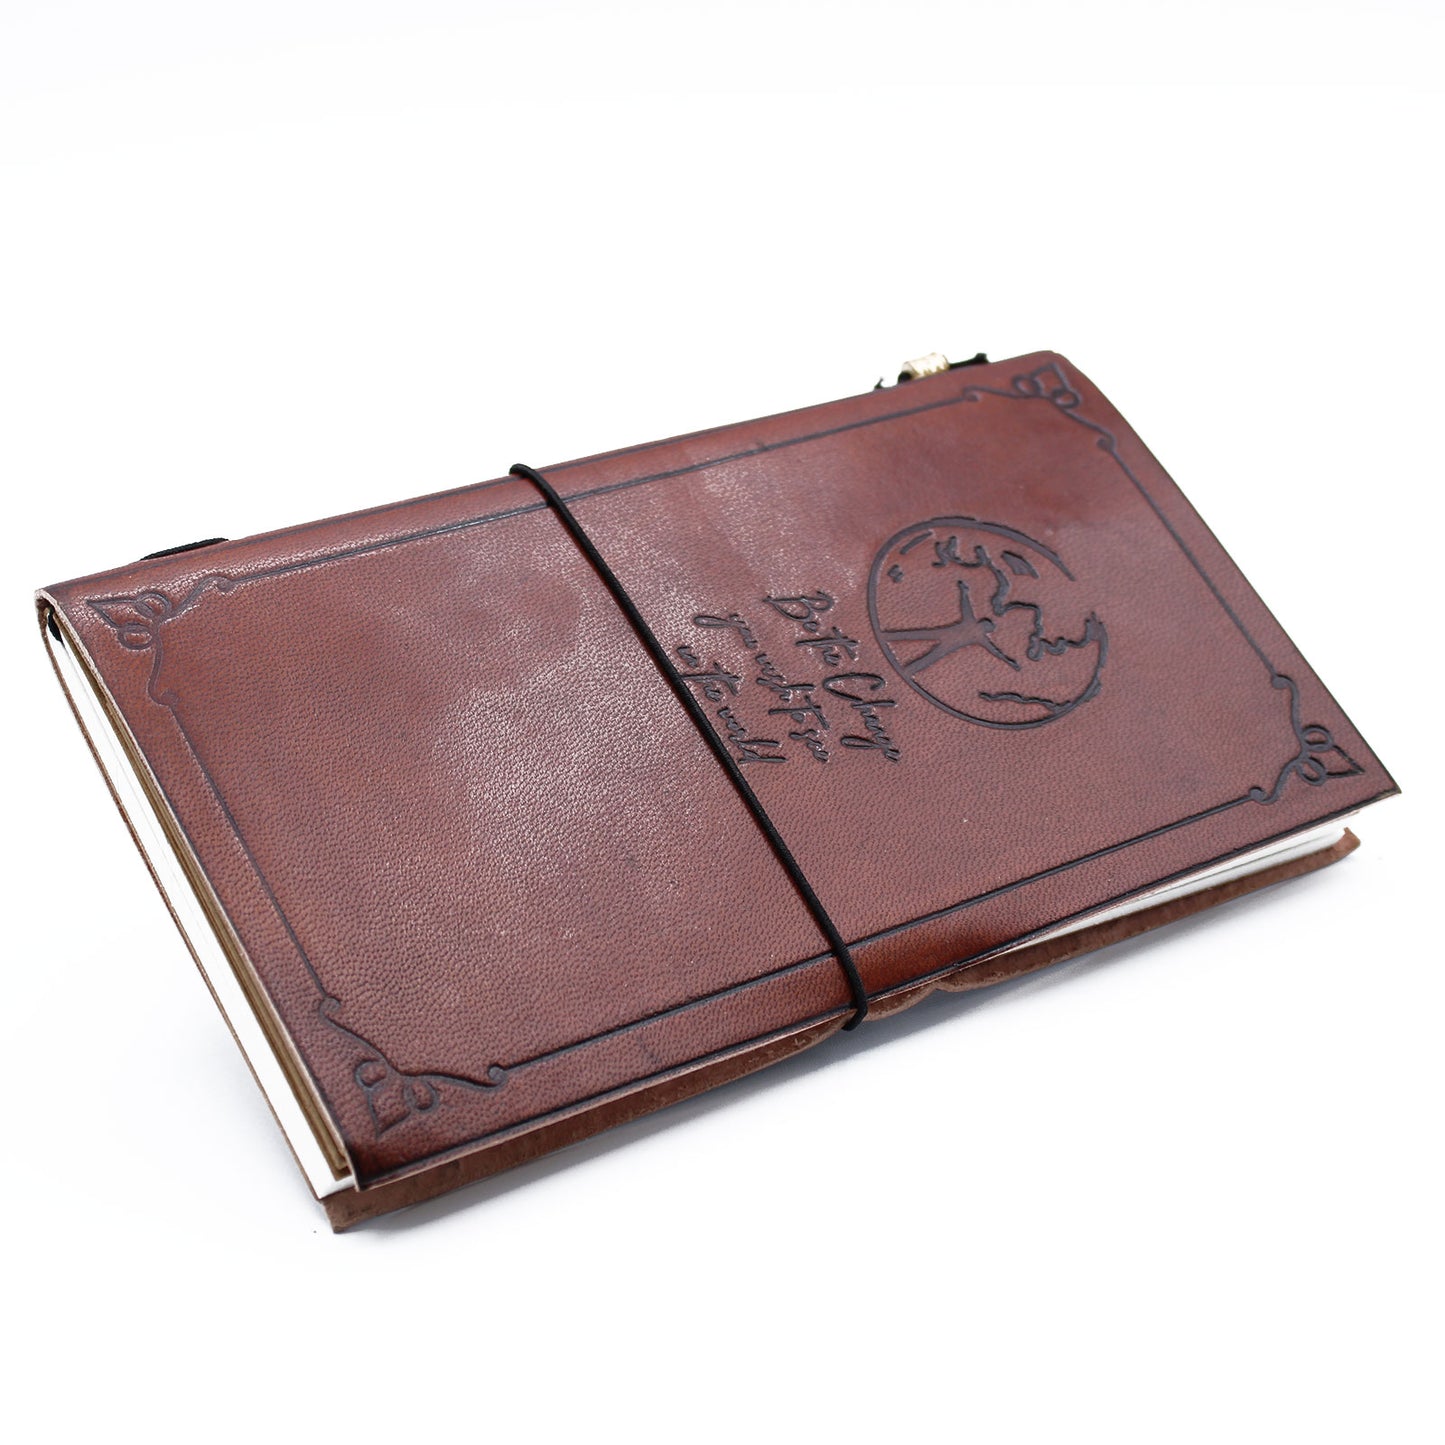 Handmade Leather Journal - Be the Change